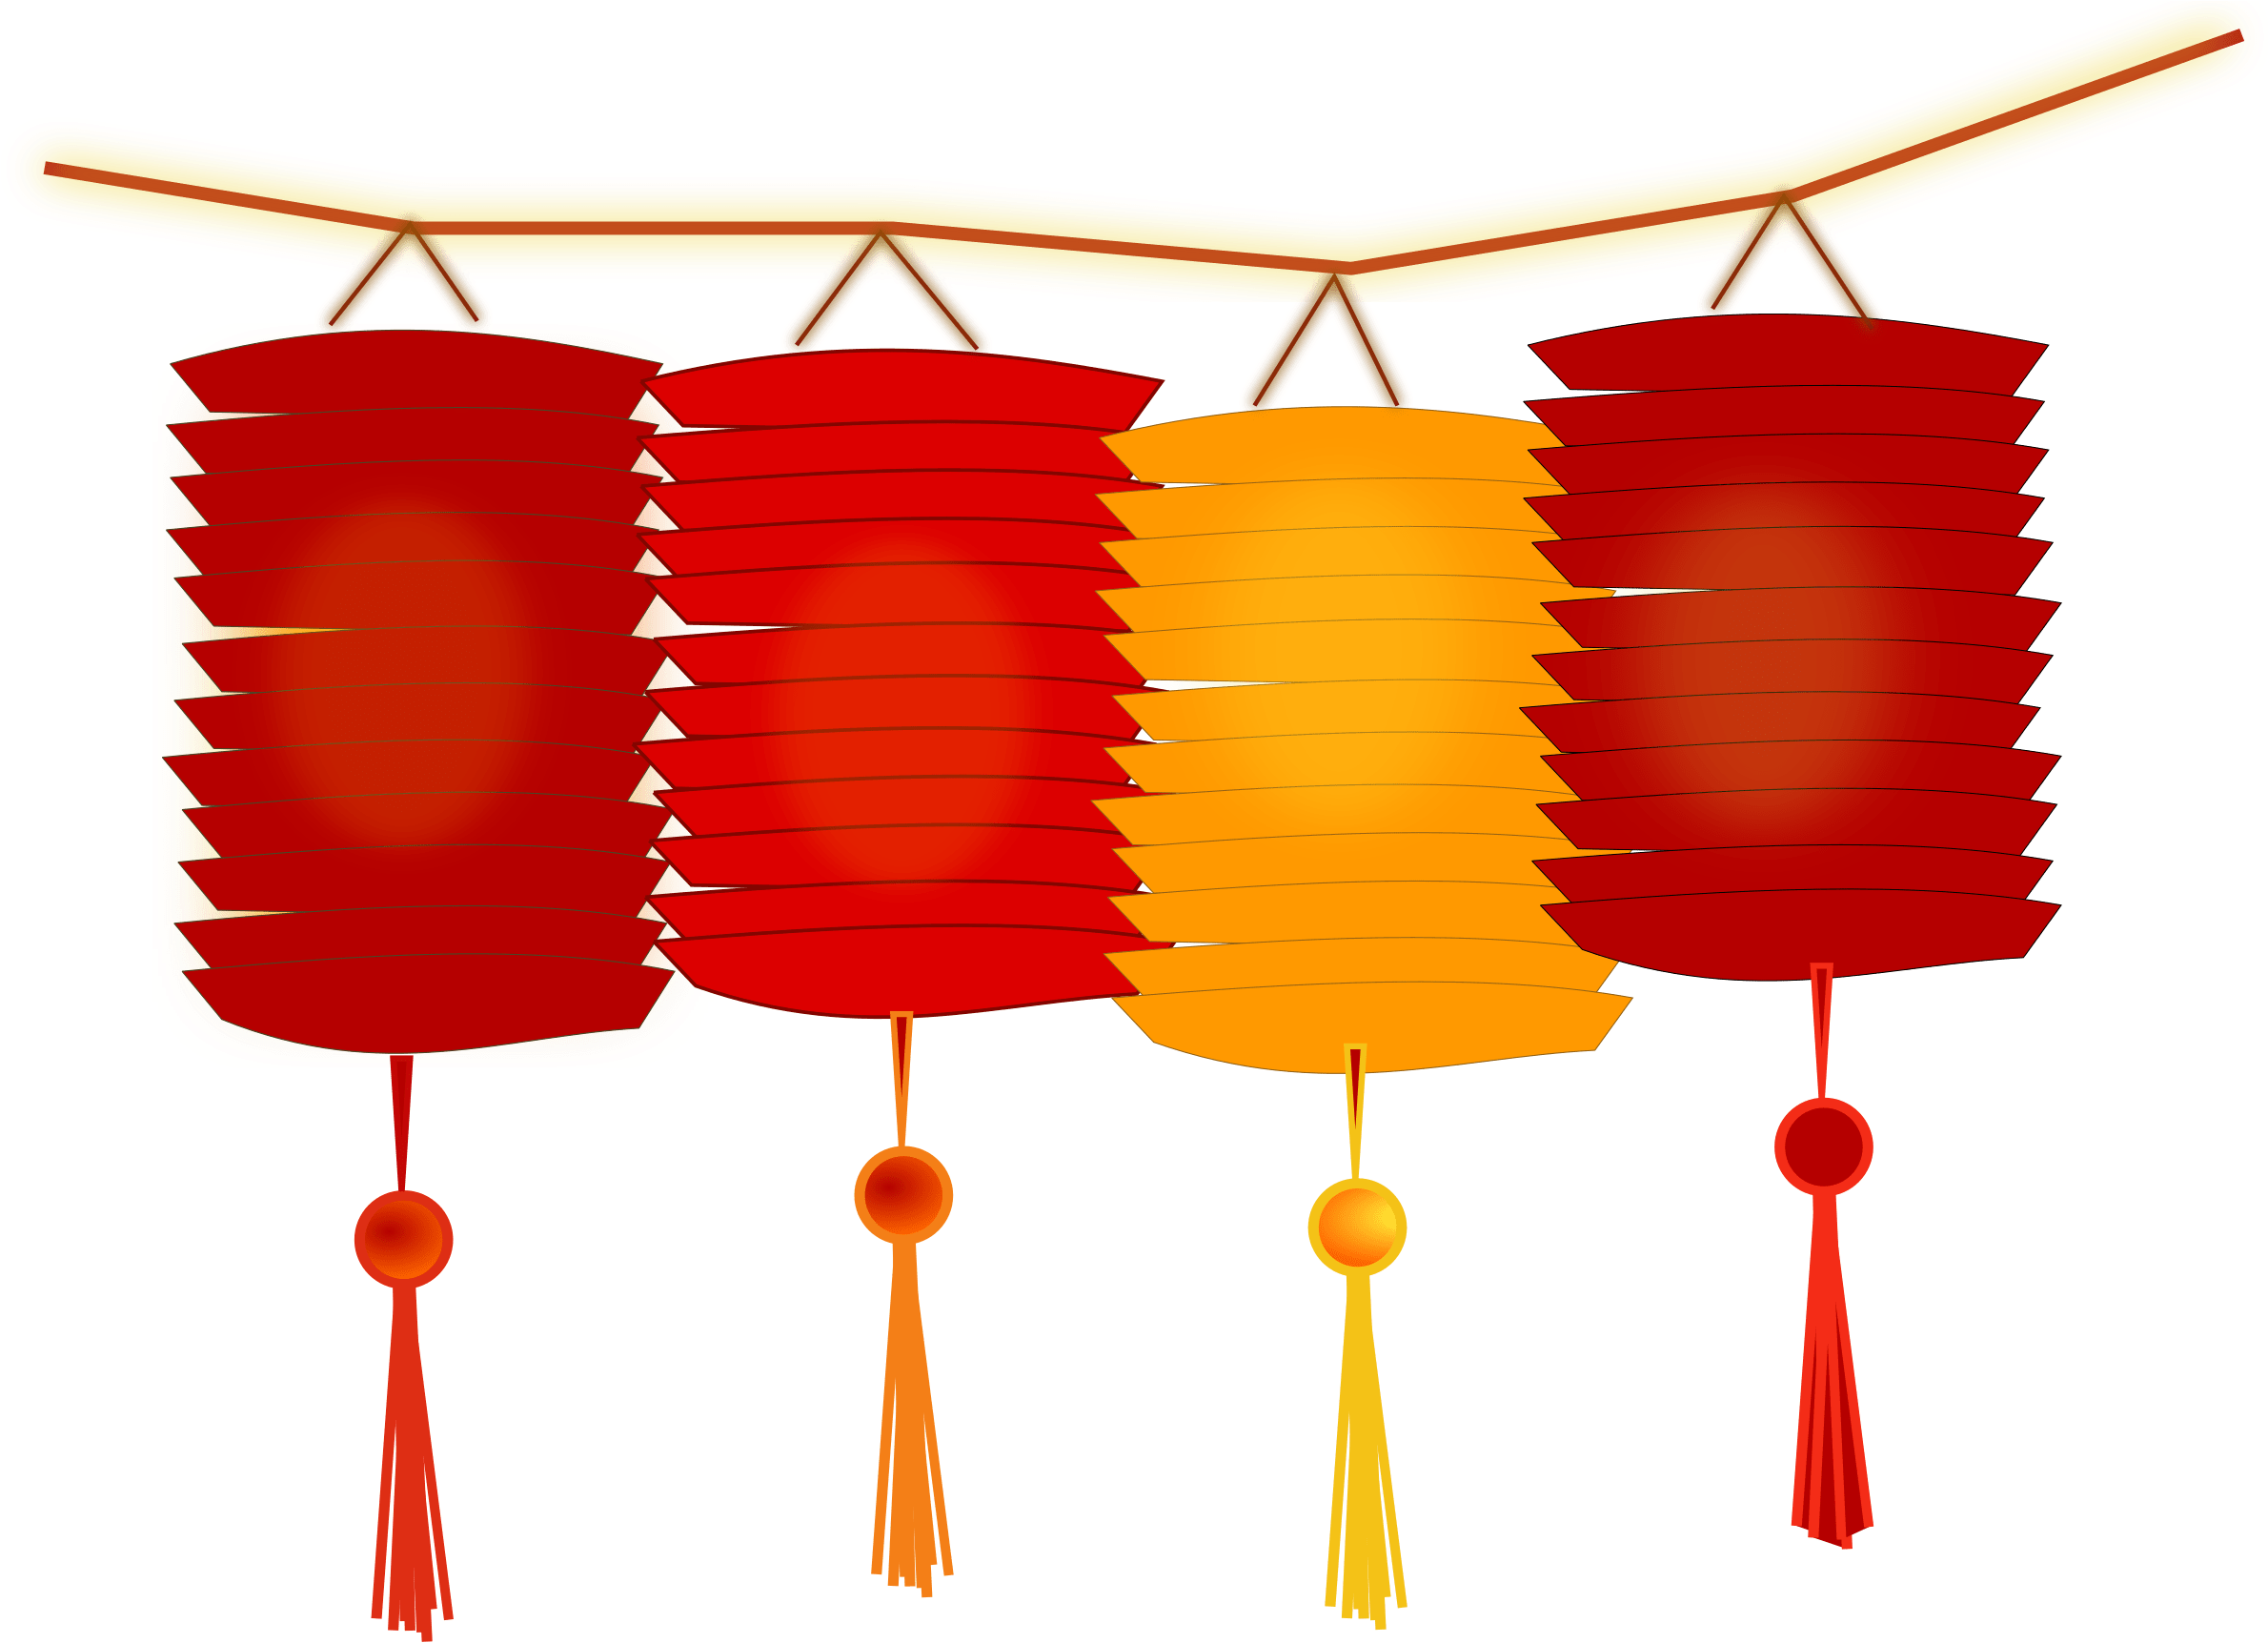 A Group Of Red And Yellow Lanterns